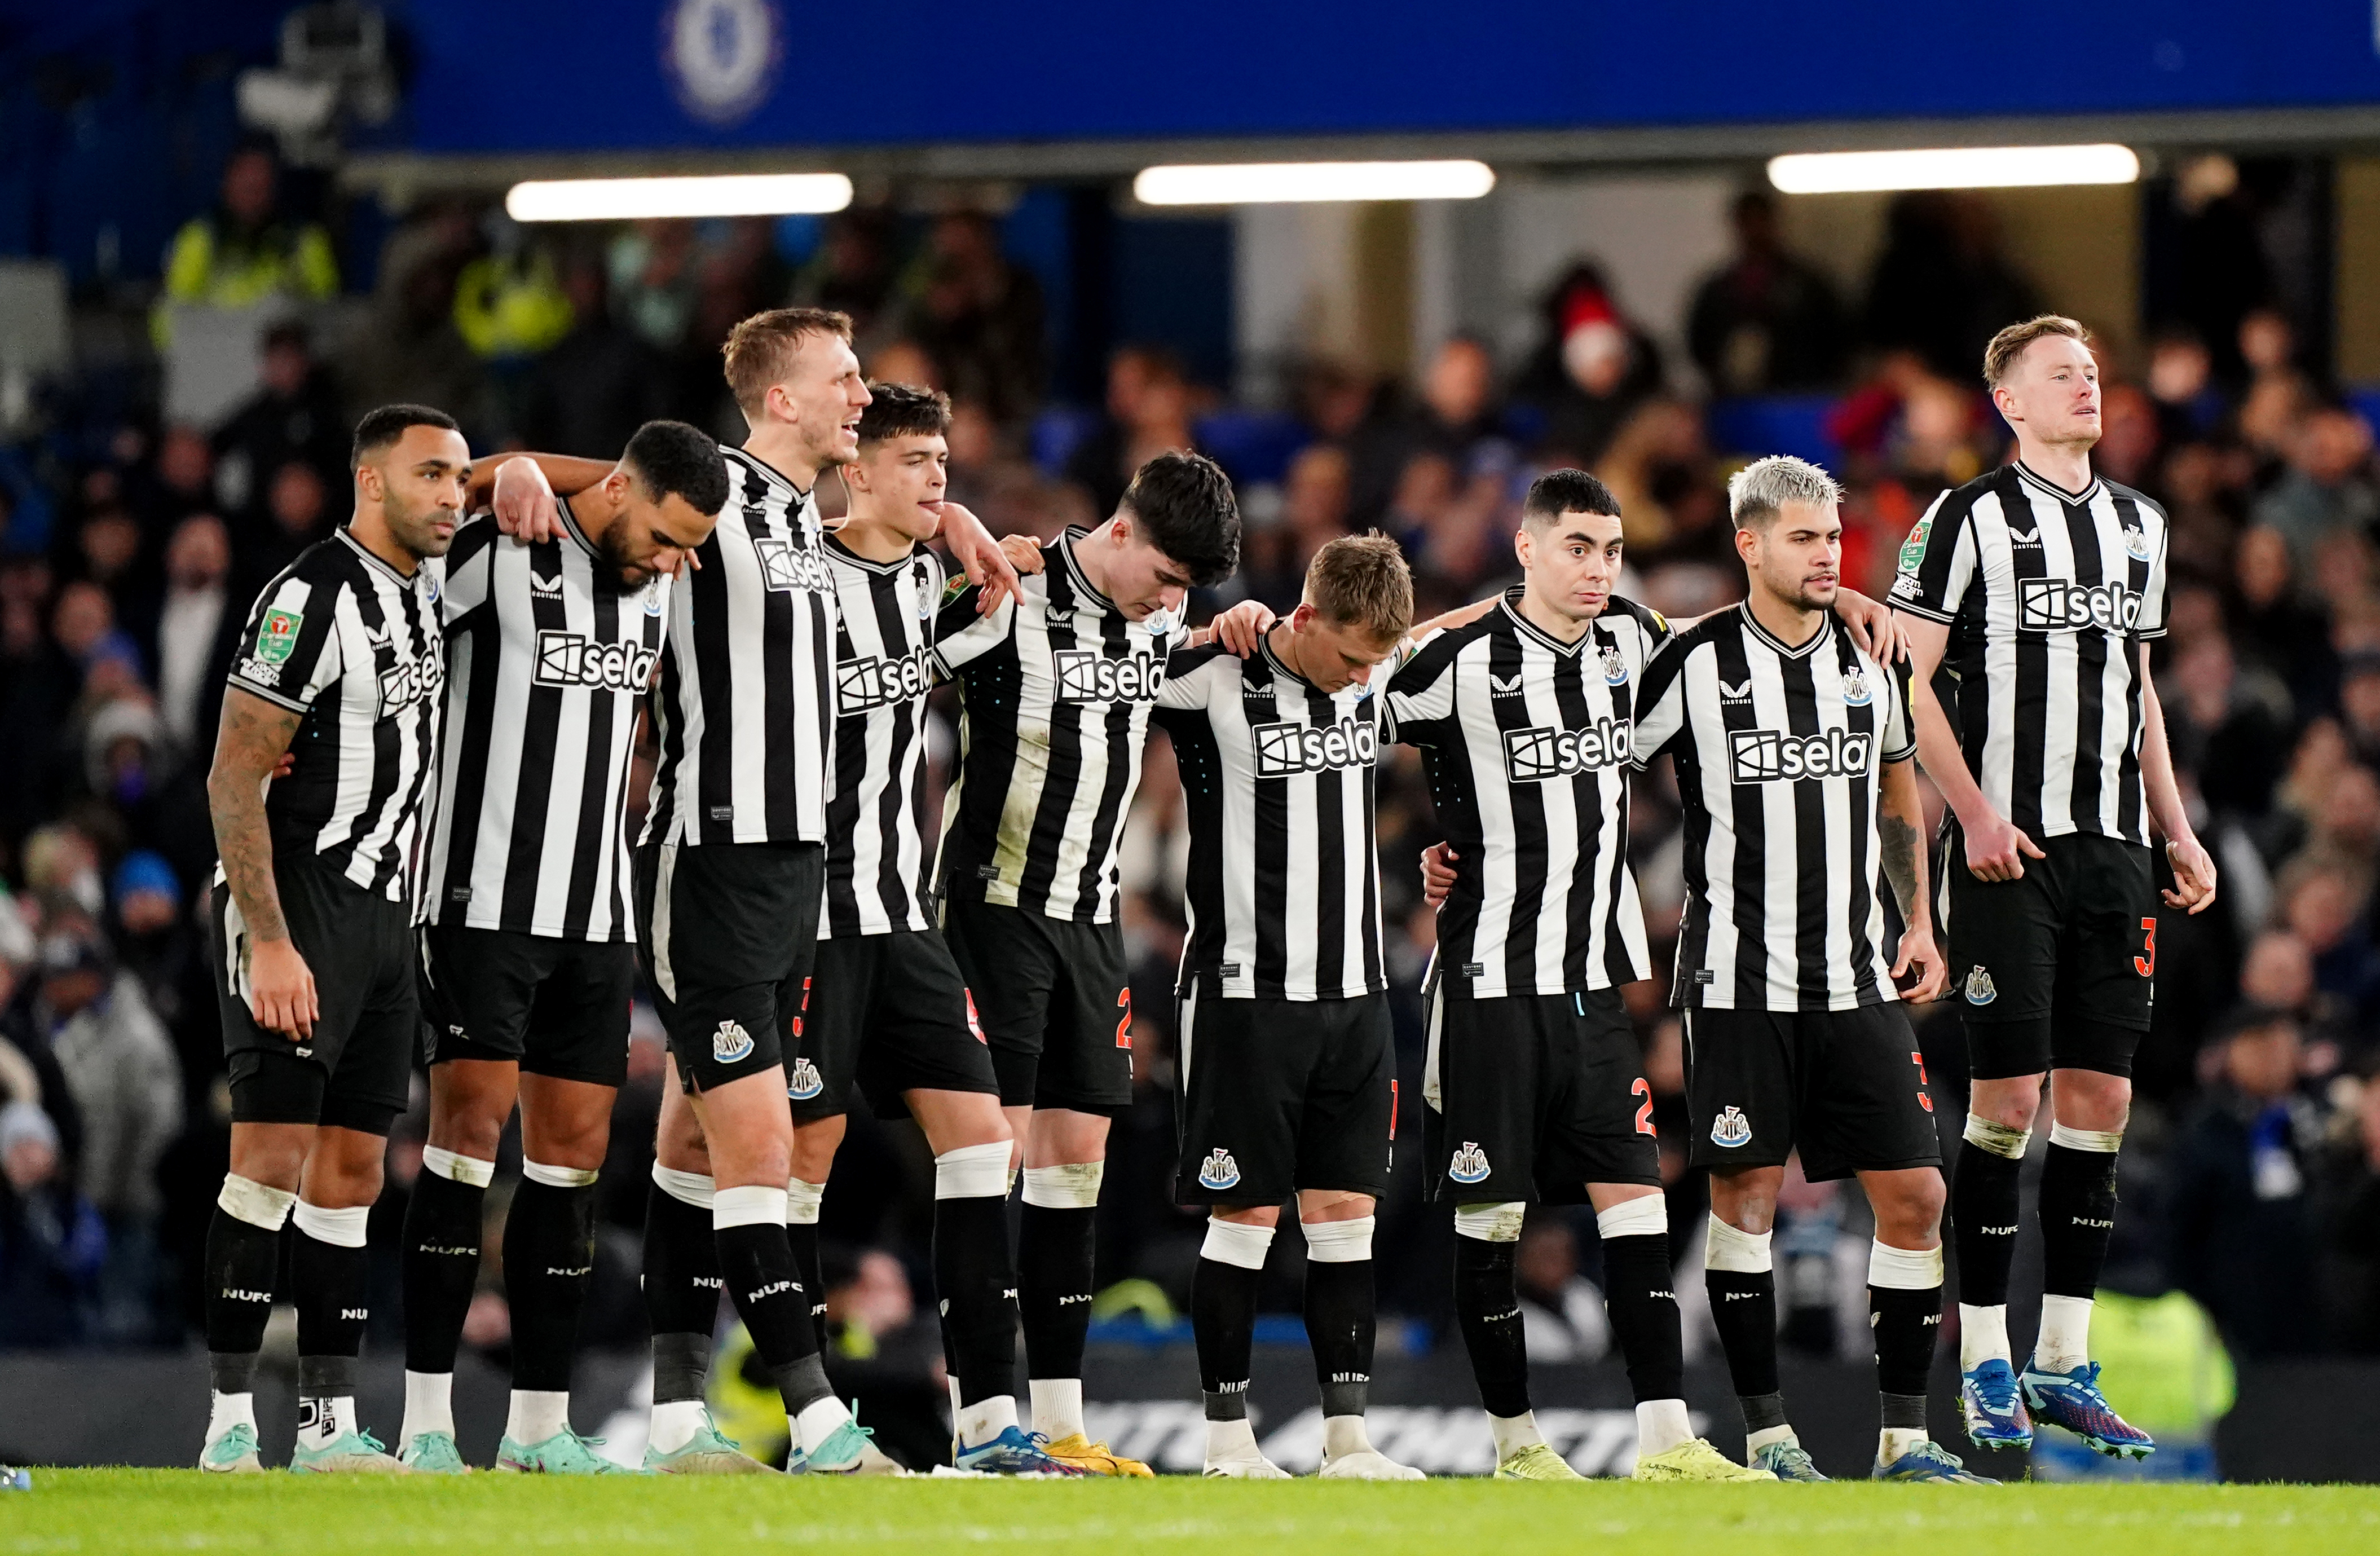 Newcastle went out of the Carabao Cup after a quarter-final penalty shoot-out defeat at Chelsea